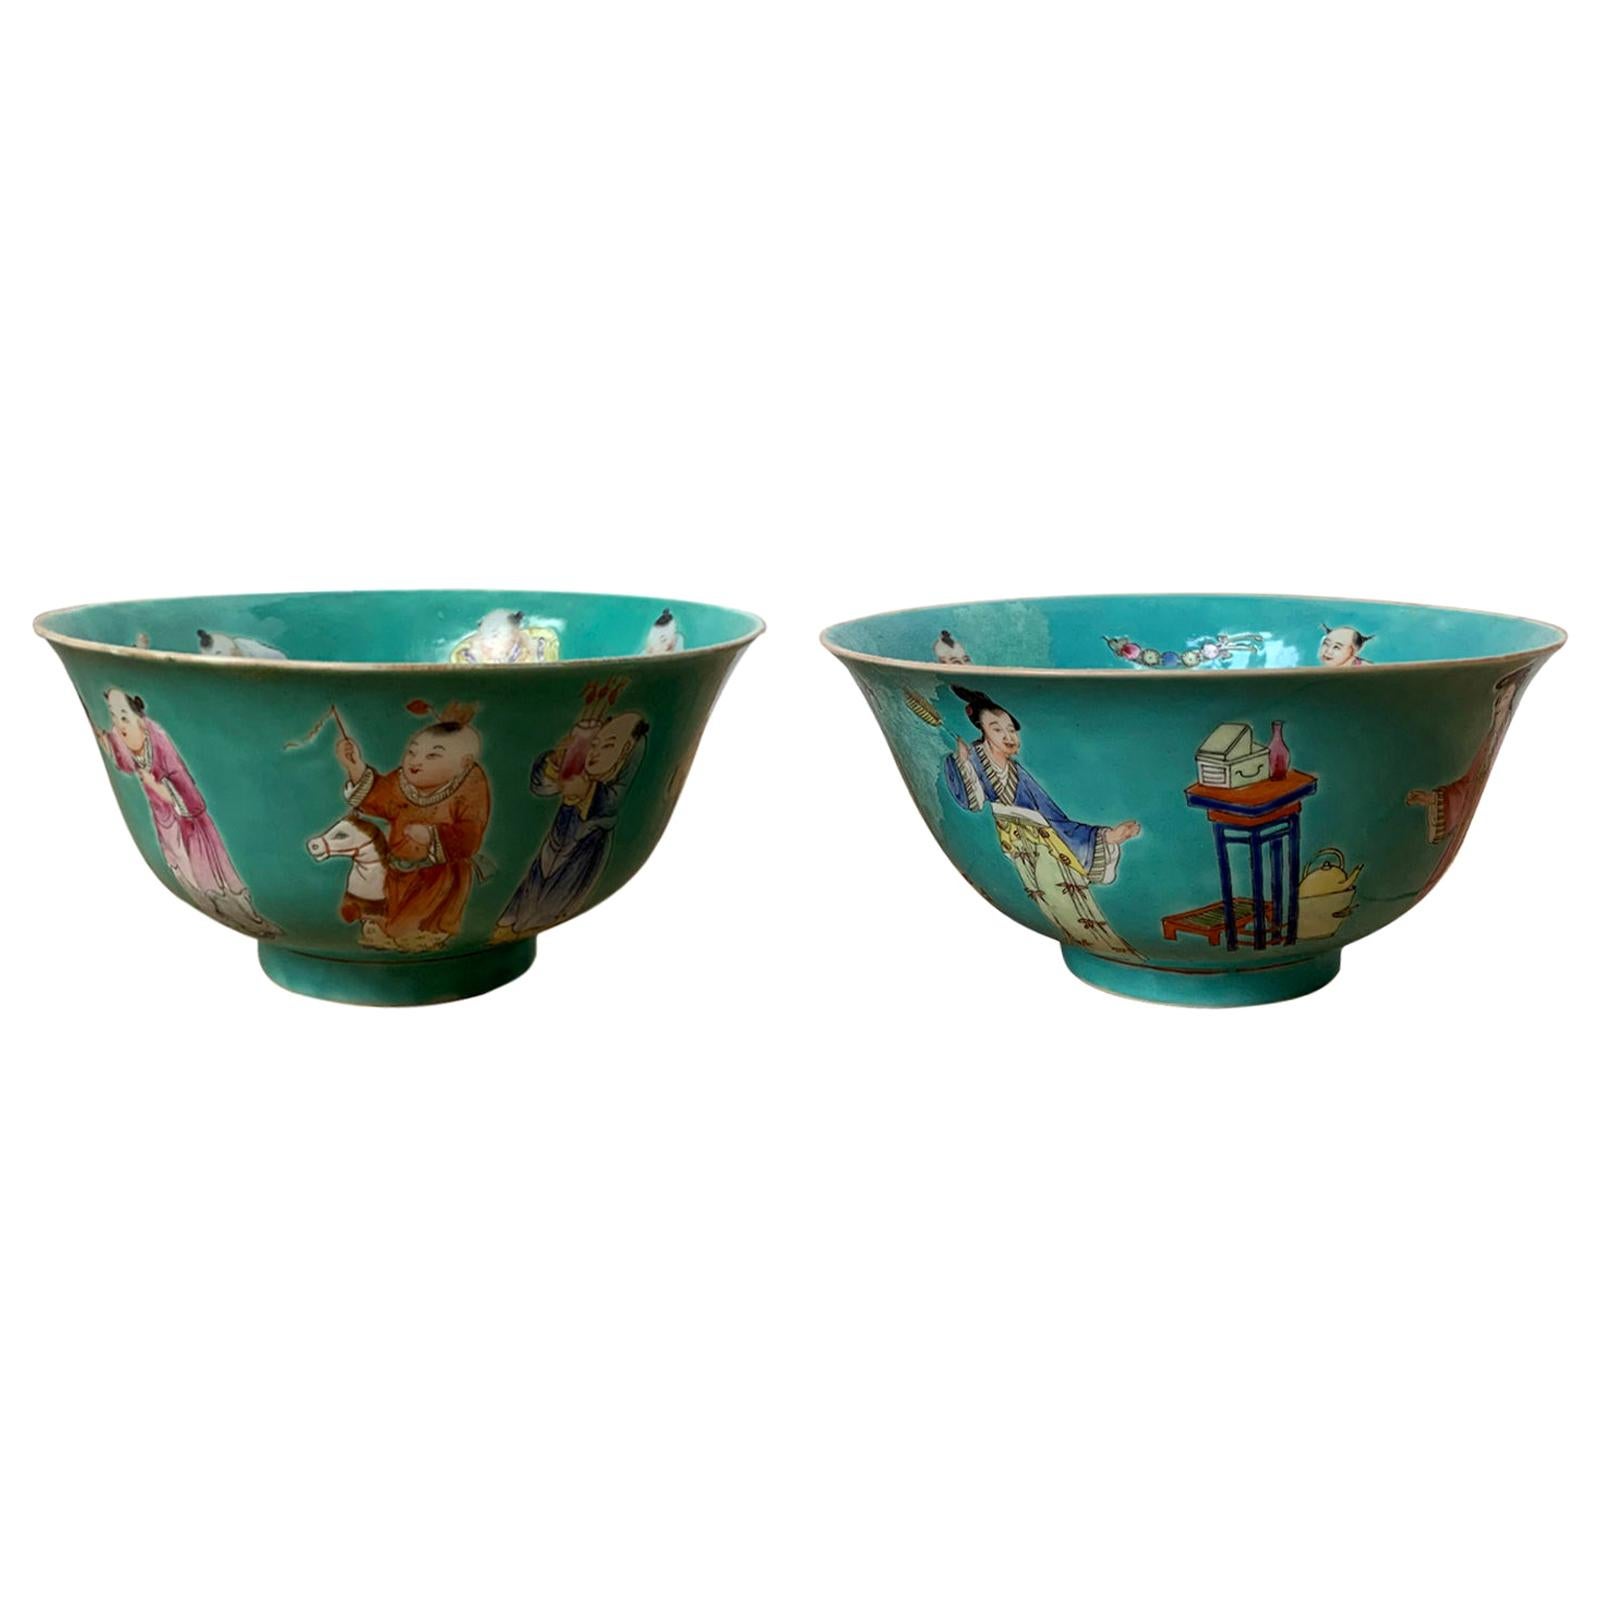 Pair of Chinese Jiaqing Famille Rose Turquoise Bowls, Hundred Boys Pattern